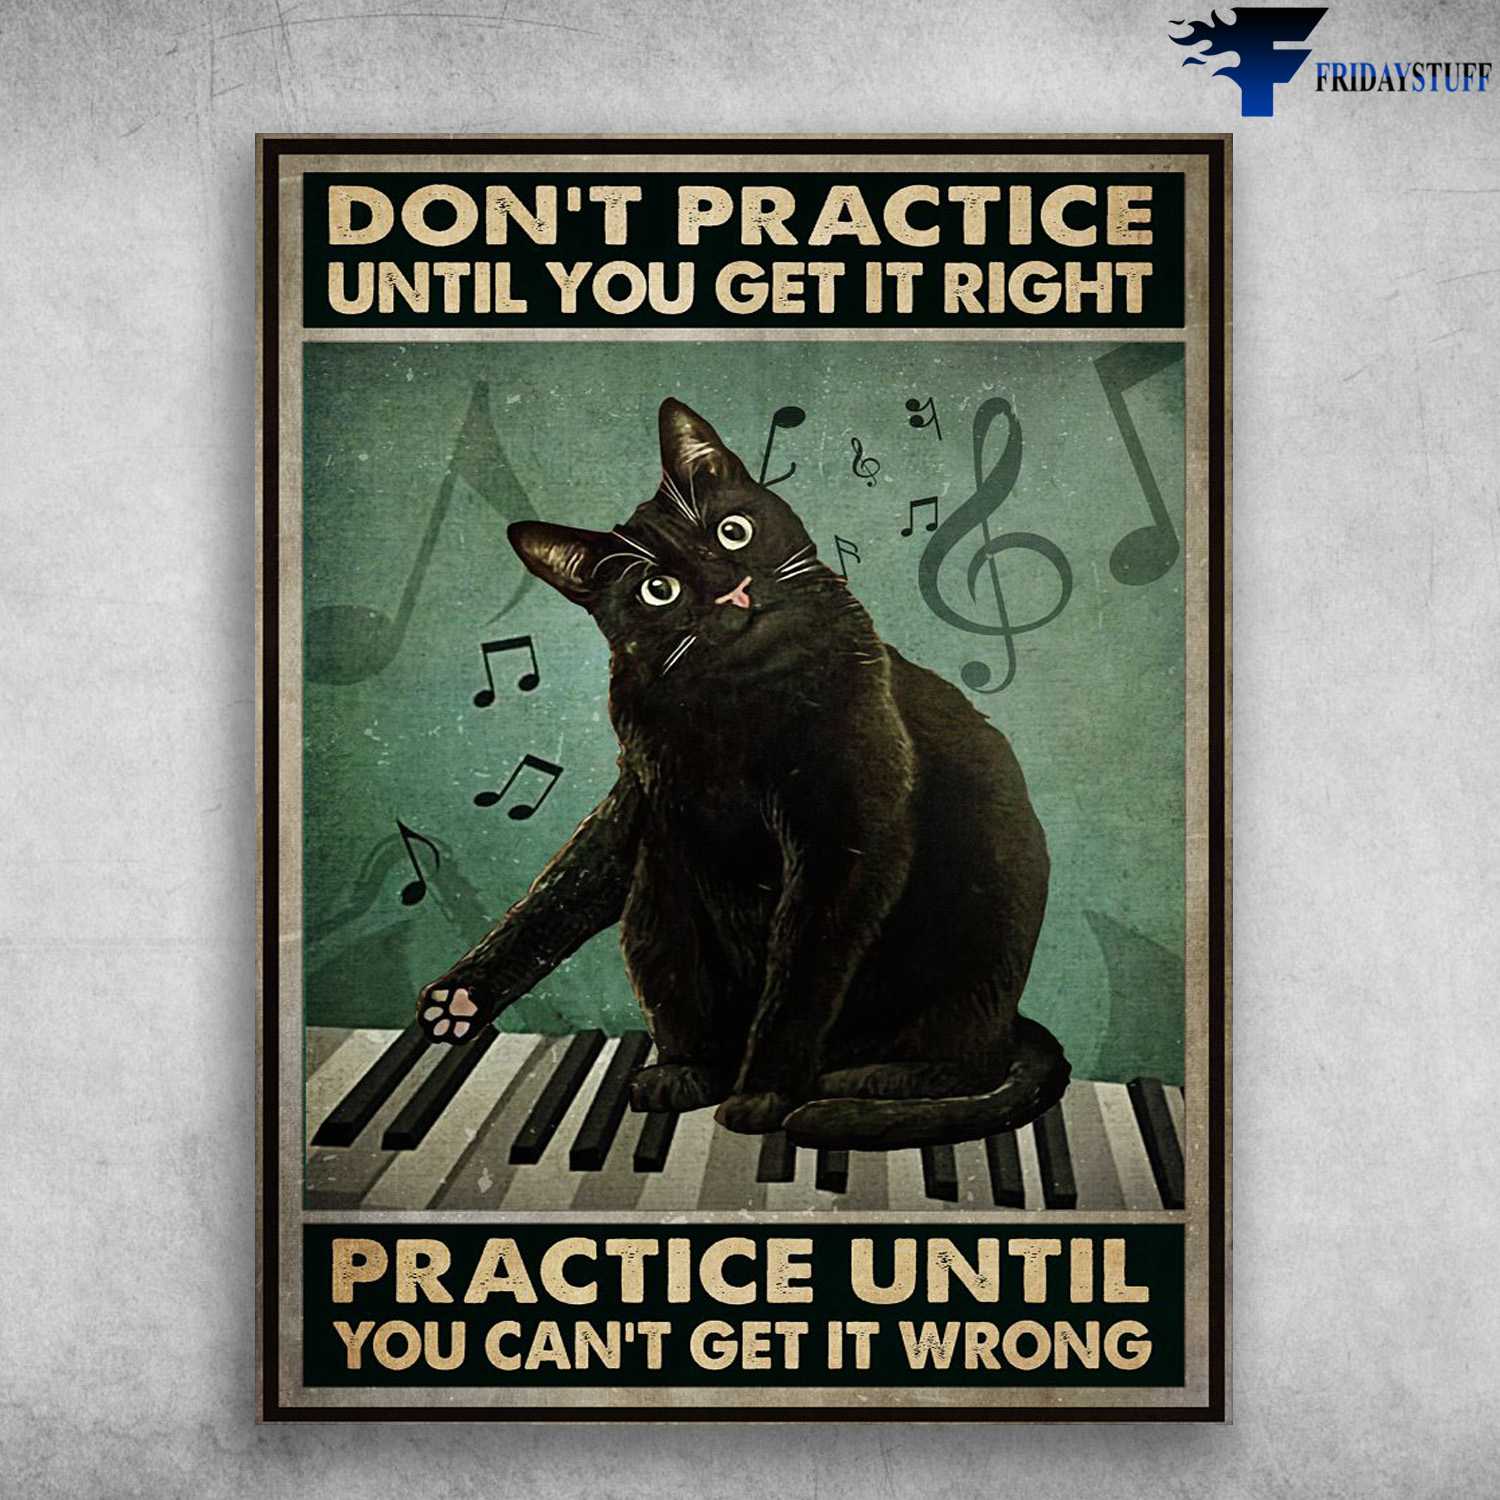 Black Cat Piano, Piano Practice - Don't Practive Until You Get It Right, Practice Until You Can't Get It Wrong